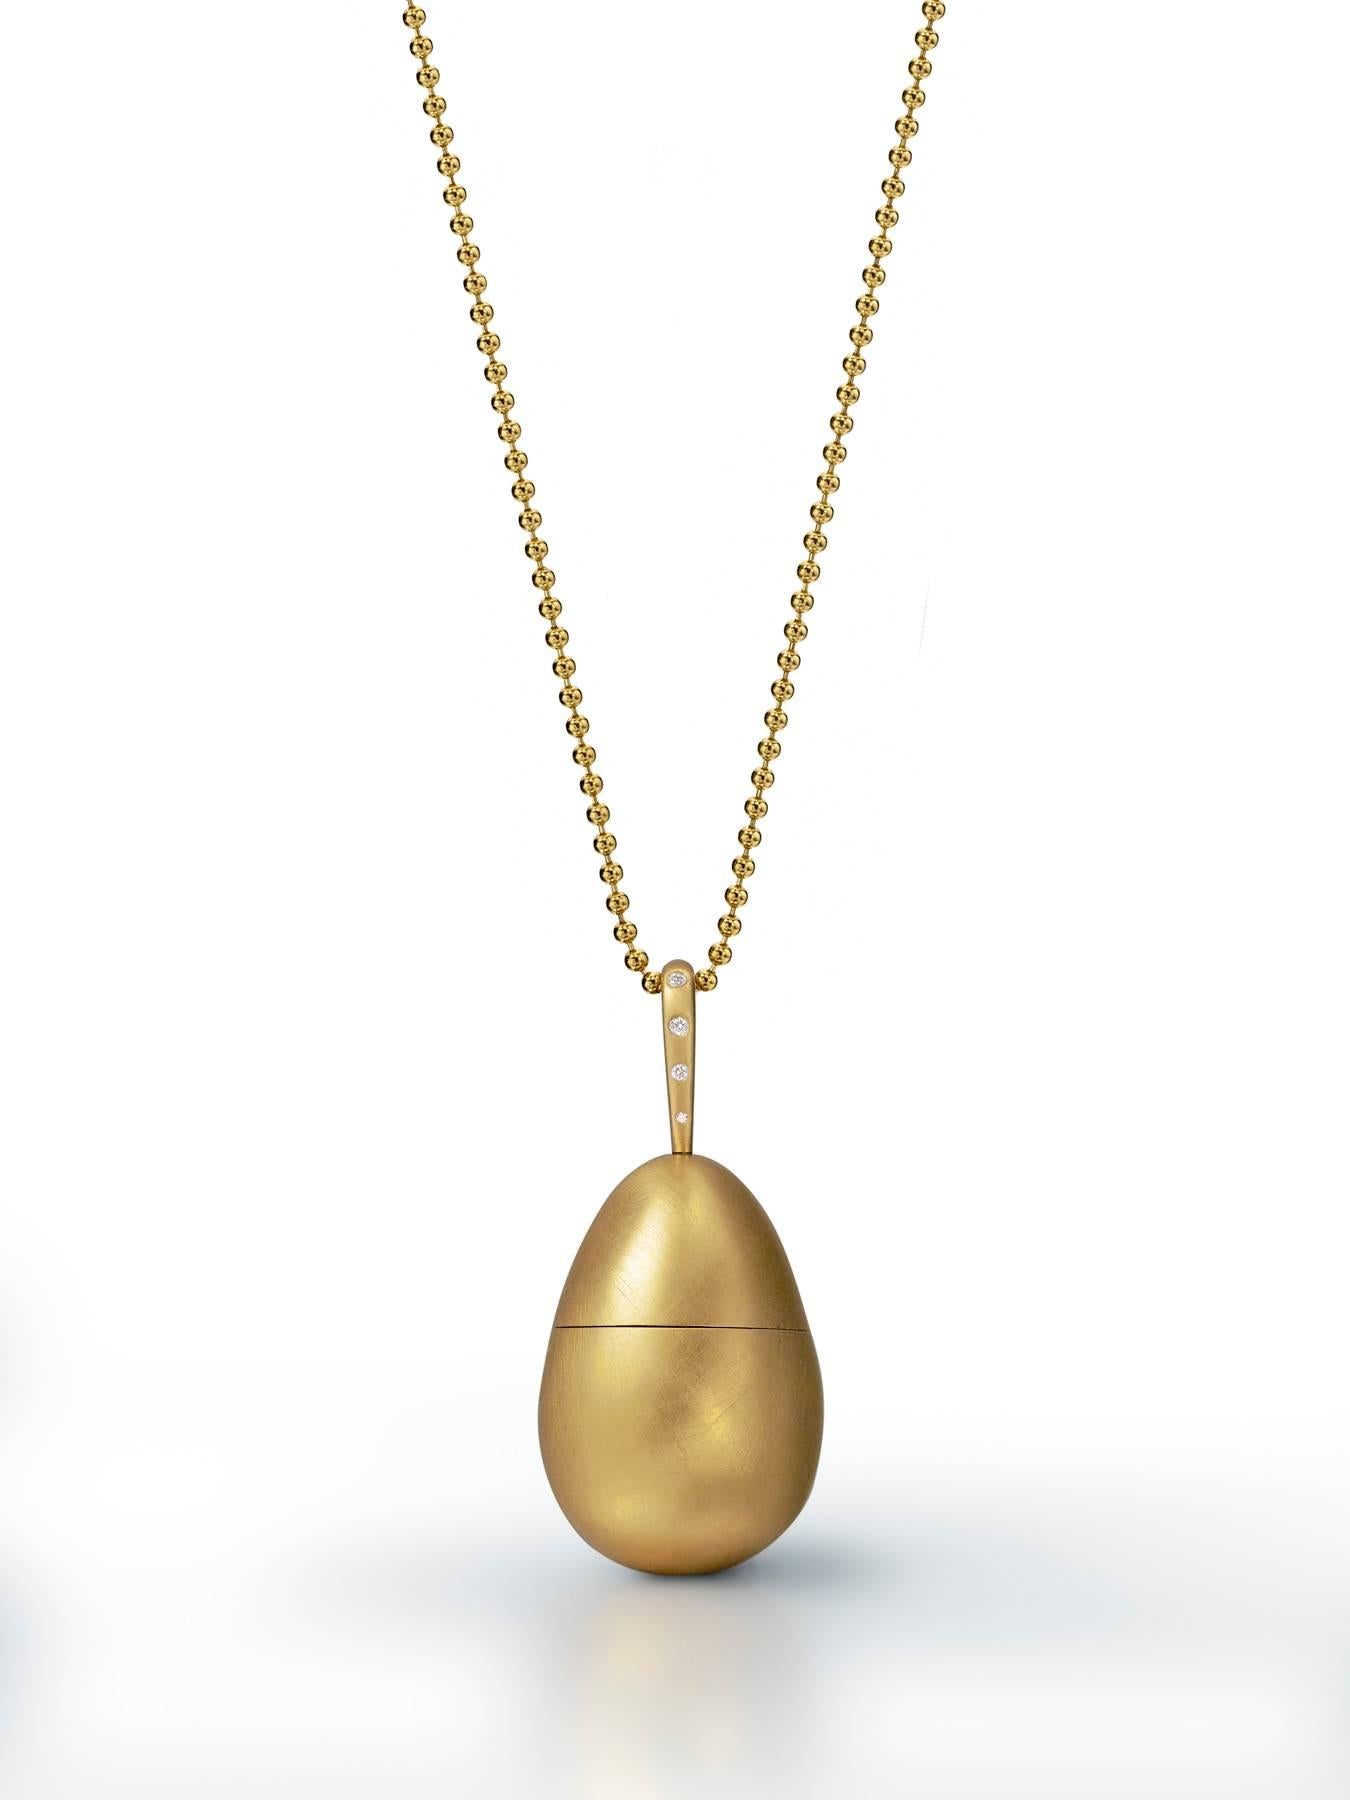 Egg opens up to reveal a silver chicken with diamond eyes.
Chicken opens up to reveal three golden eggs.
22.5 grams of 18k yellow gold, satin finish.
9 points of diamonds.
28” ball chain.
Limited edition, number 2 of 5.
Made in New York City.
For a